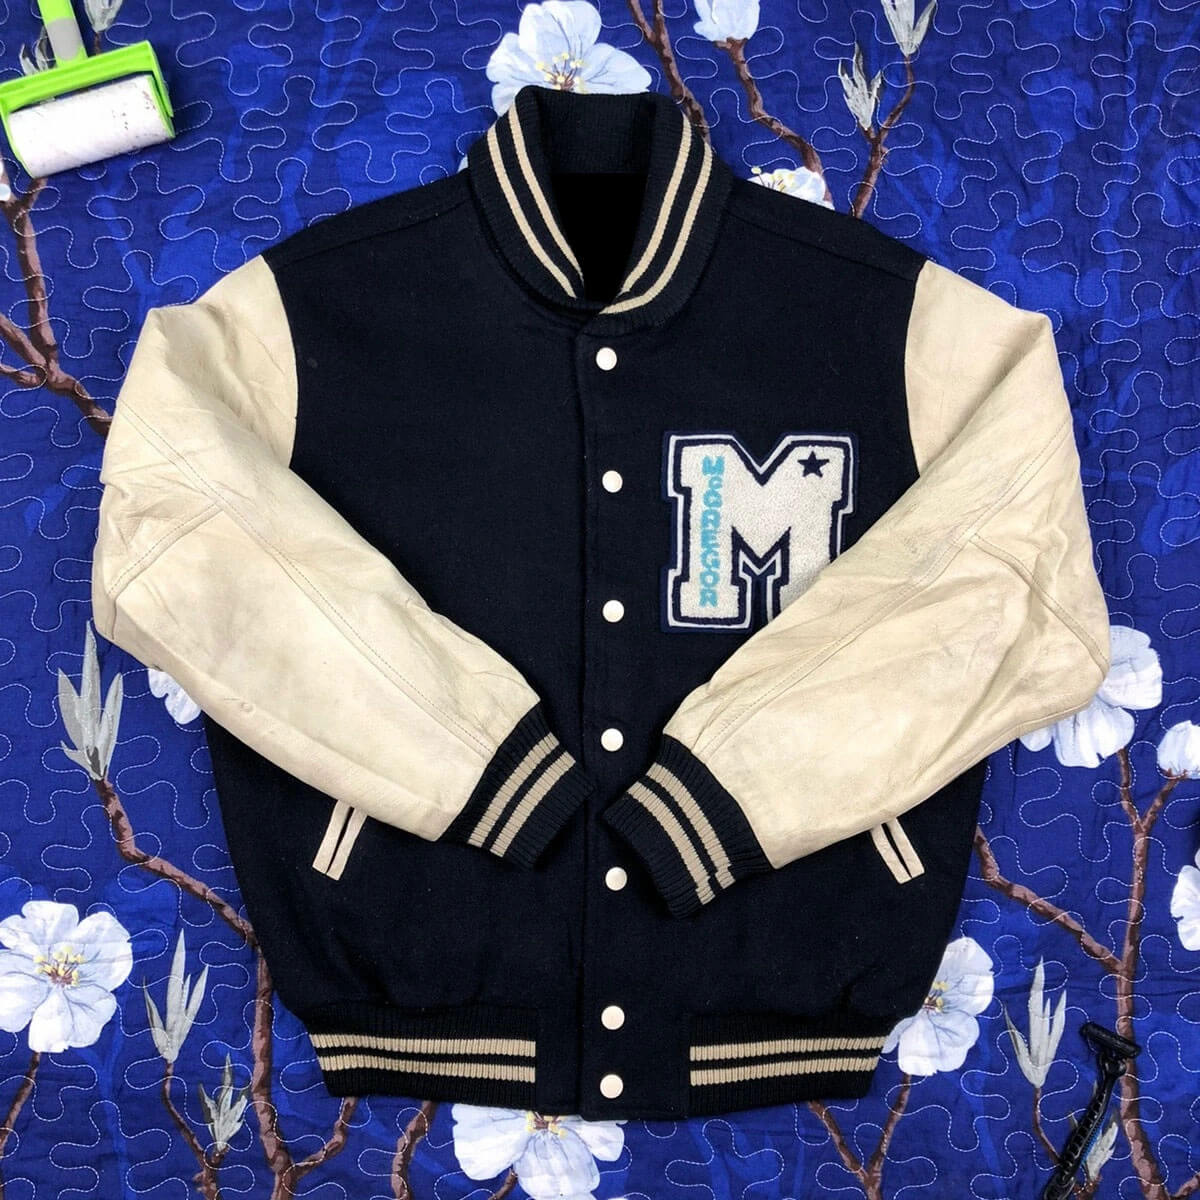 Mighty Ducks Letterman Jacket For Men's and Women's